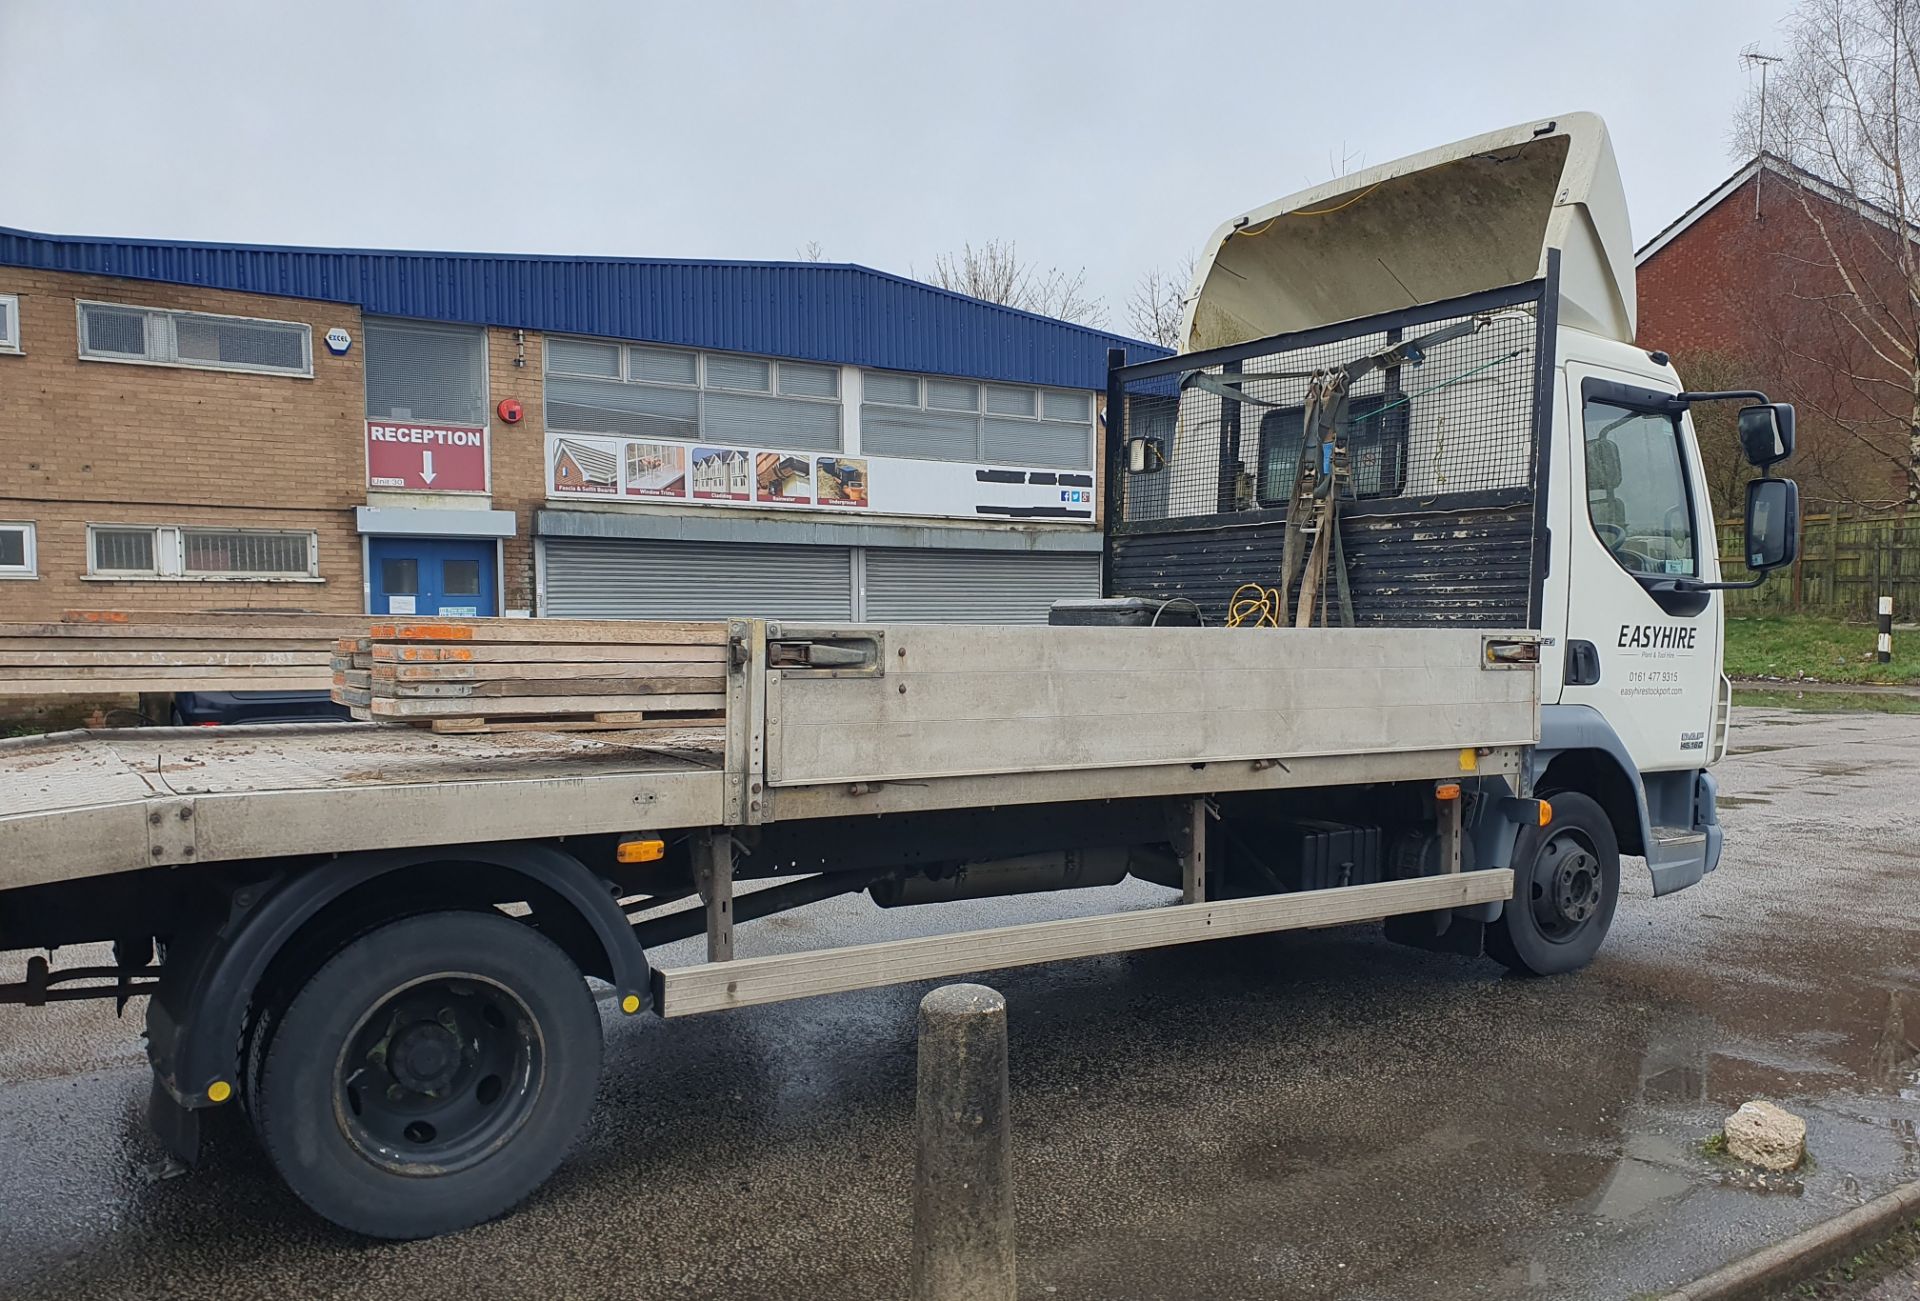 DAF LF 45.160 Flatbed Lorry w/ Loading Ramp & Electric Winch | DIG 4987 | 494,328km - Image 11 of 22